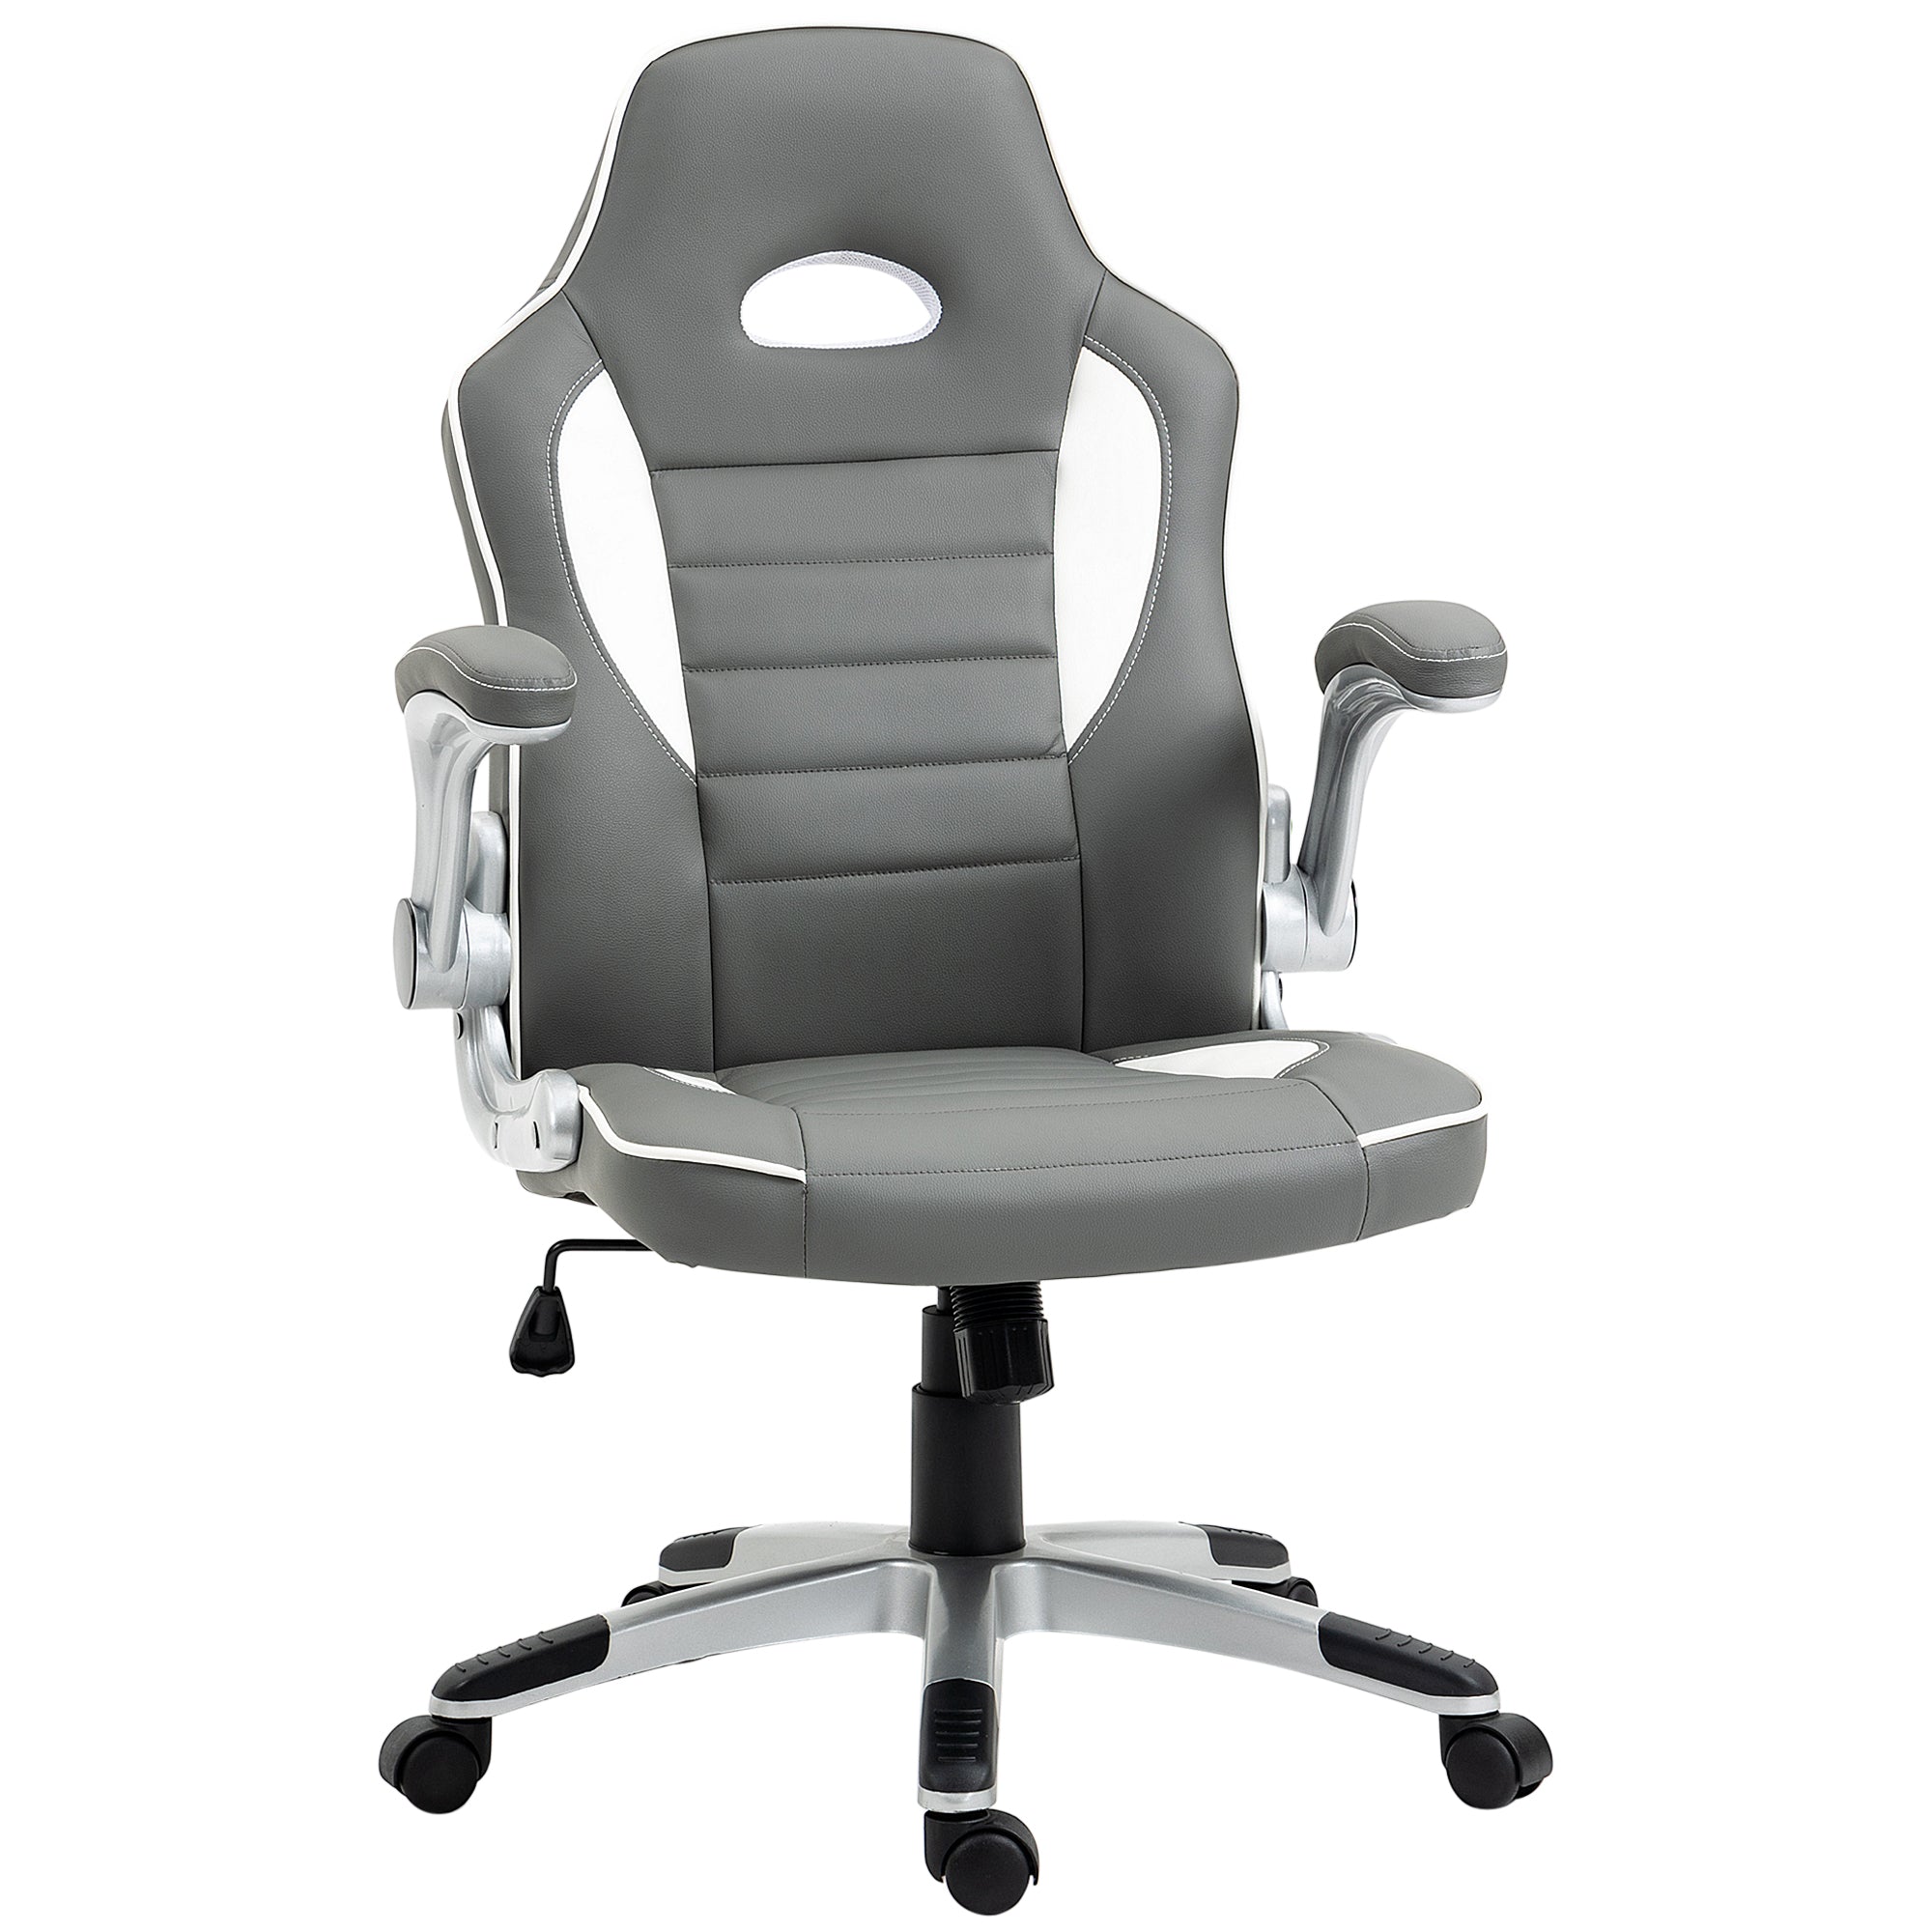 HOMCOM Gaming Chair PU Leather Office Chair Swivel Chair w/ Tilt Function Grey - Vinsetto  | TJ Hughes